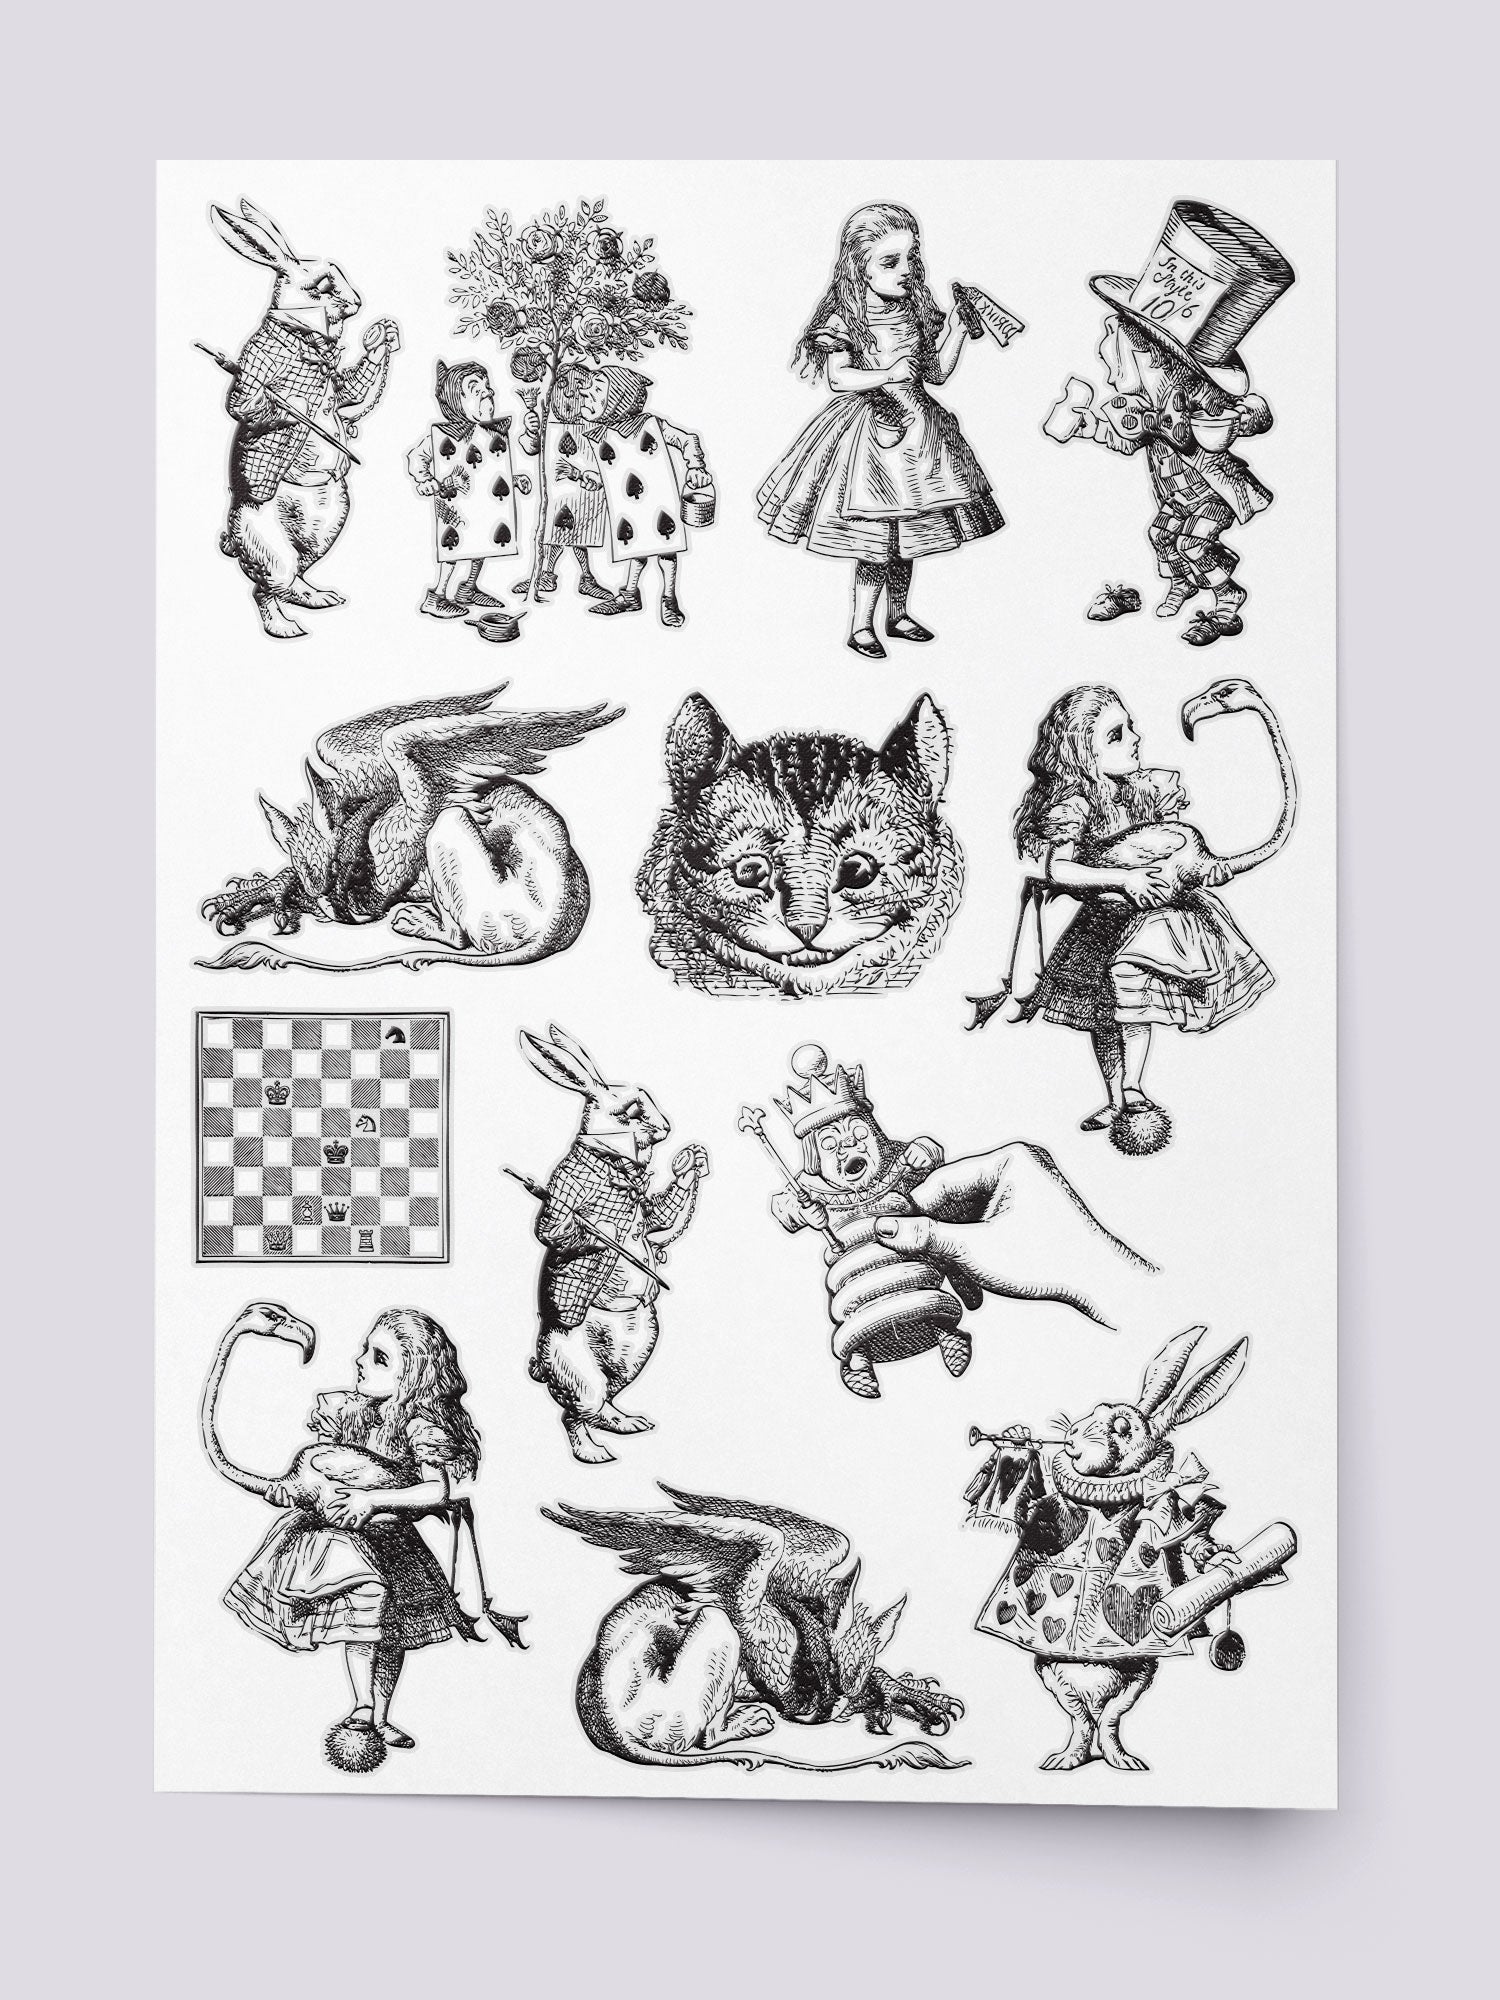 Alice in Wonderland Birthday Party Supplies,8 Sheets 100Pcs Temporary  Tattoos Party Favors,Removable Skin Safe, Fake Tattoo Stickers for Alice